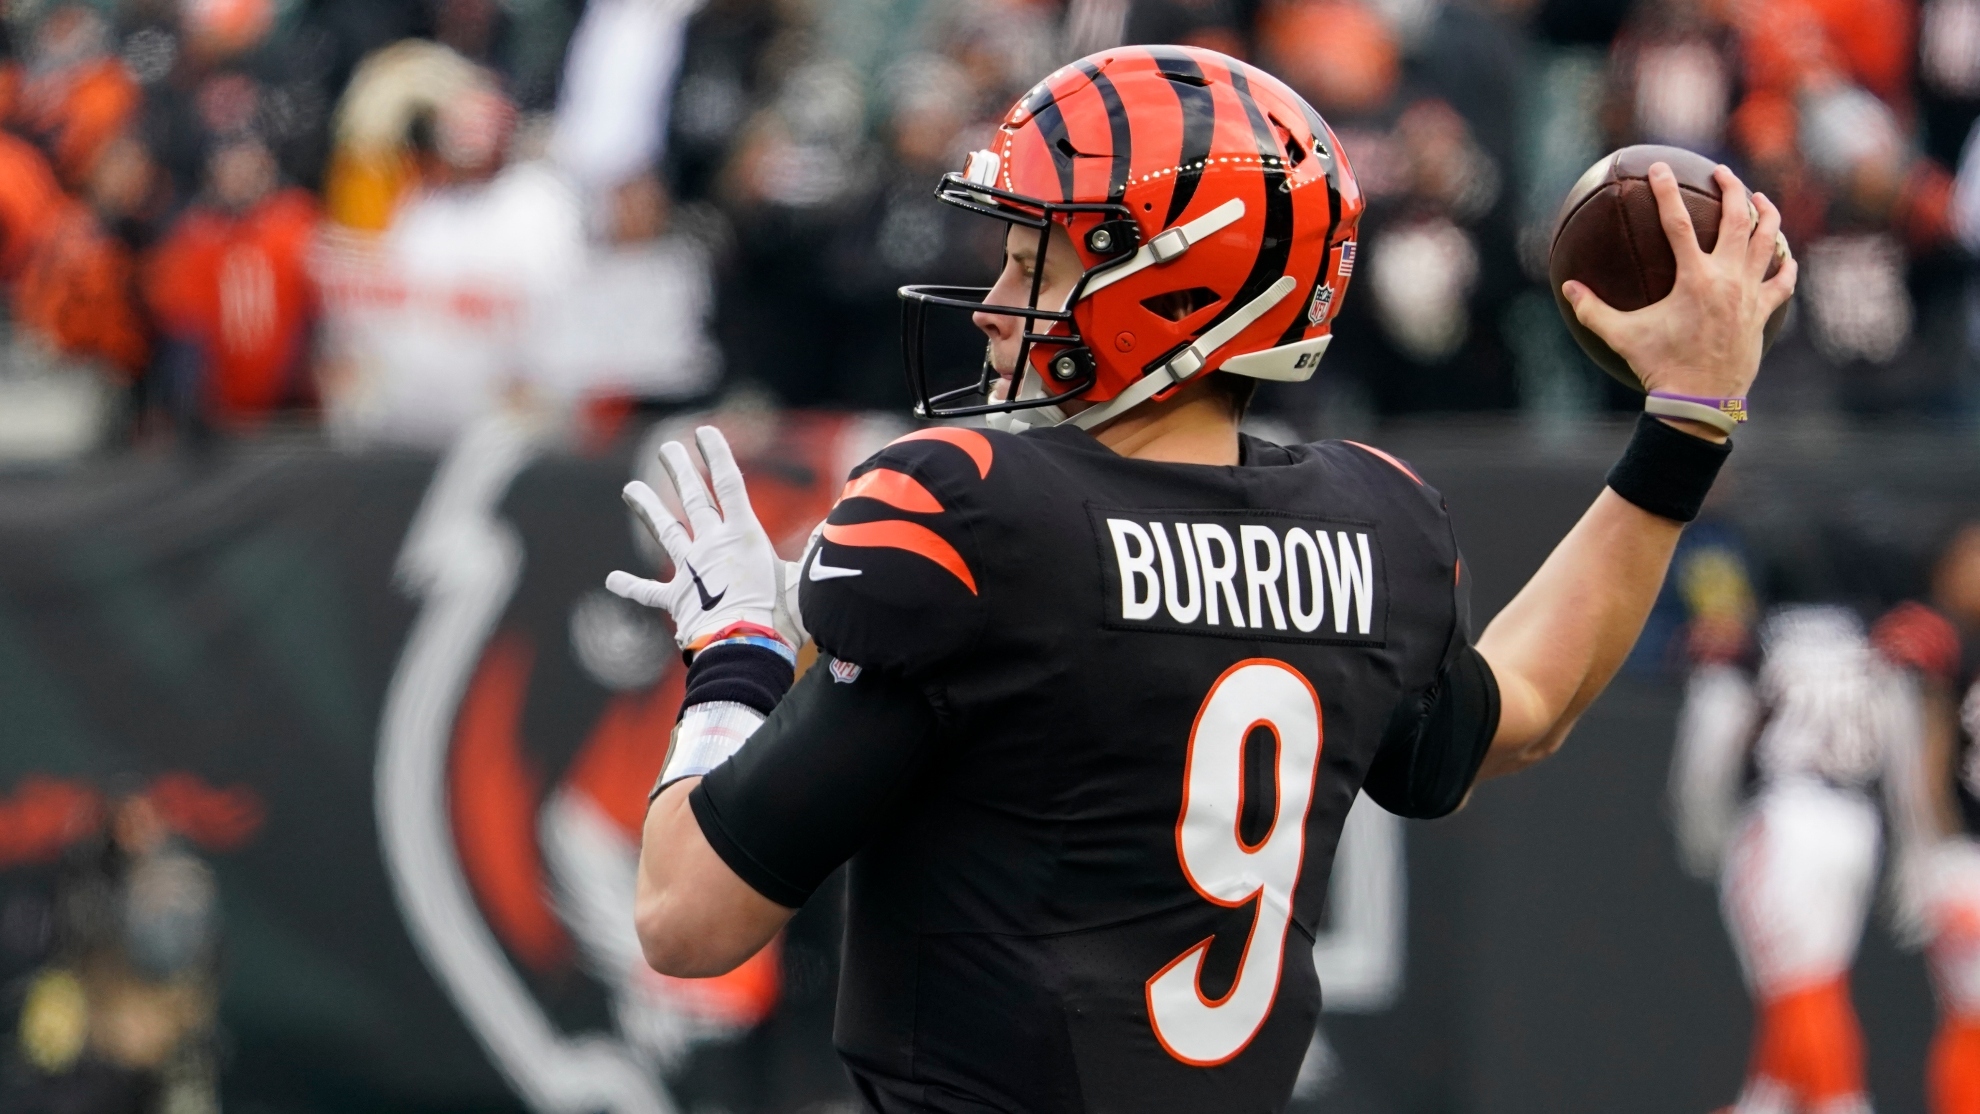 AFC North Recap, Week 15: Bengals take first place after big